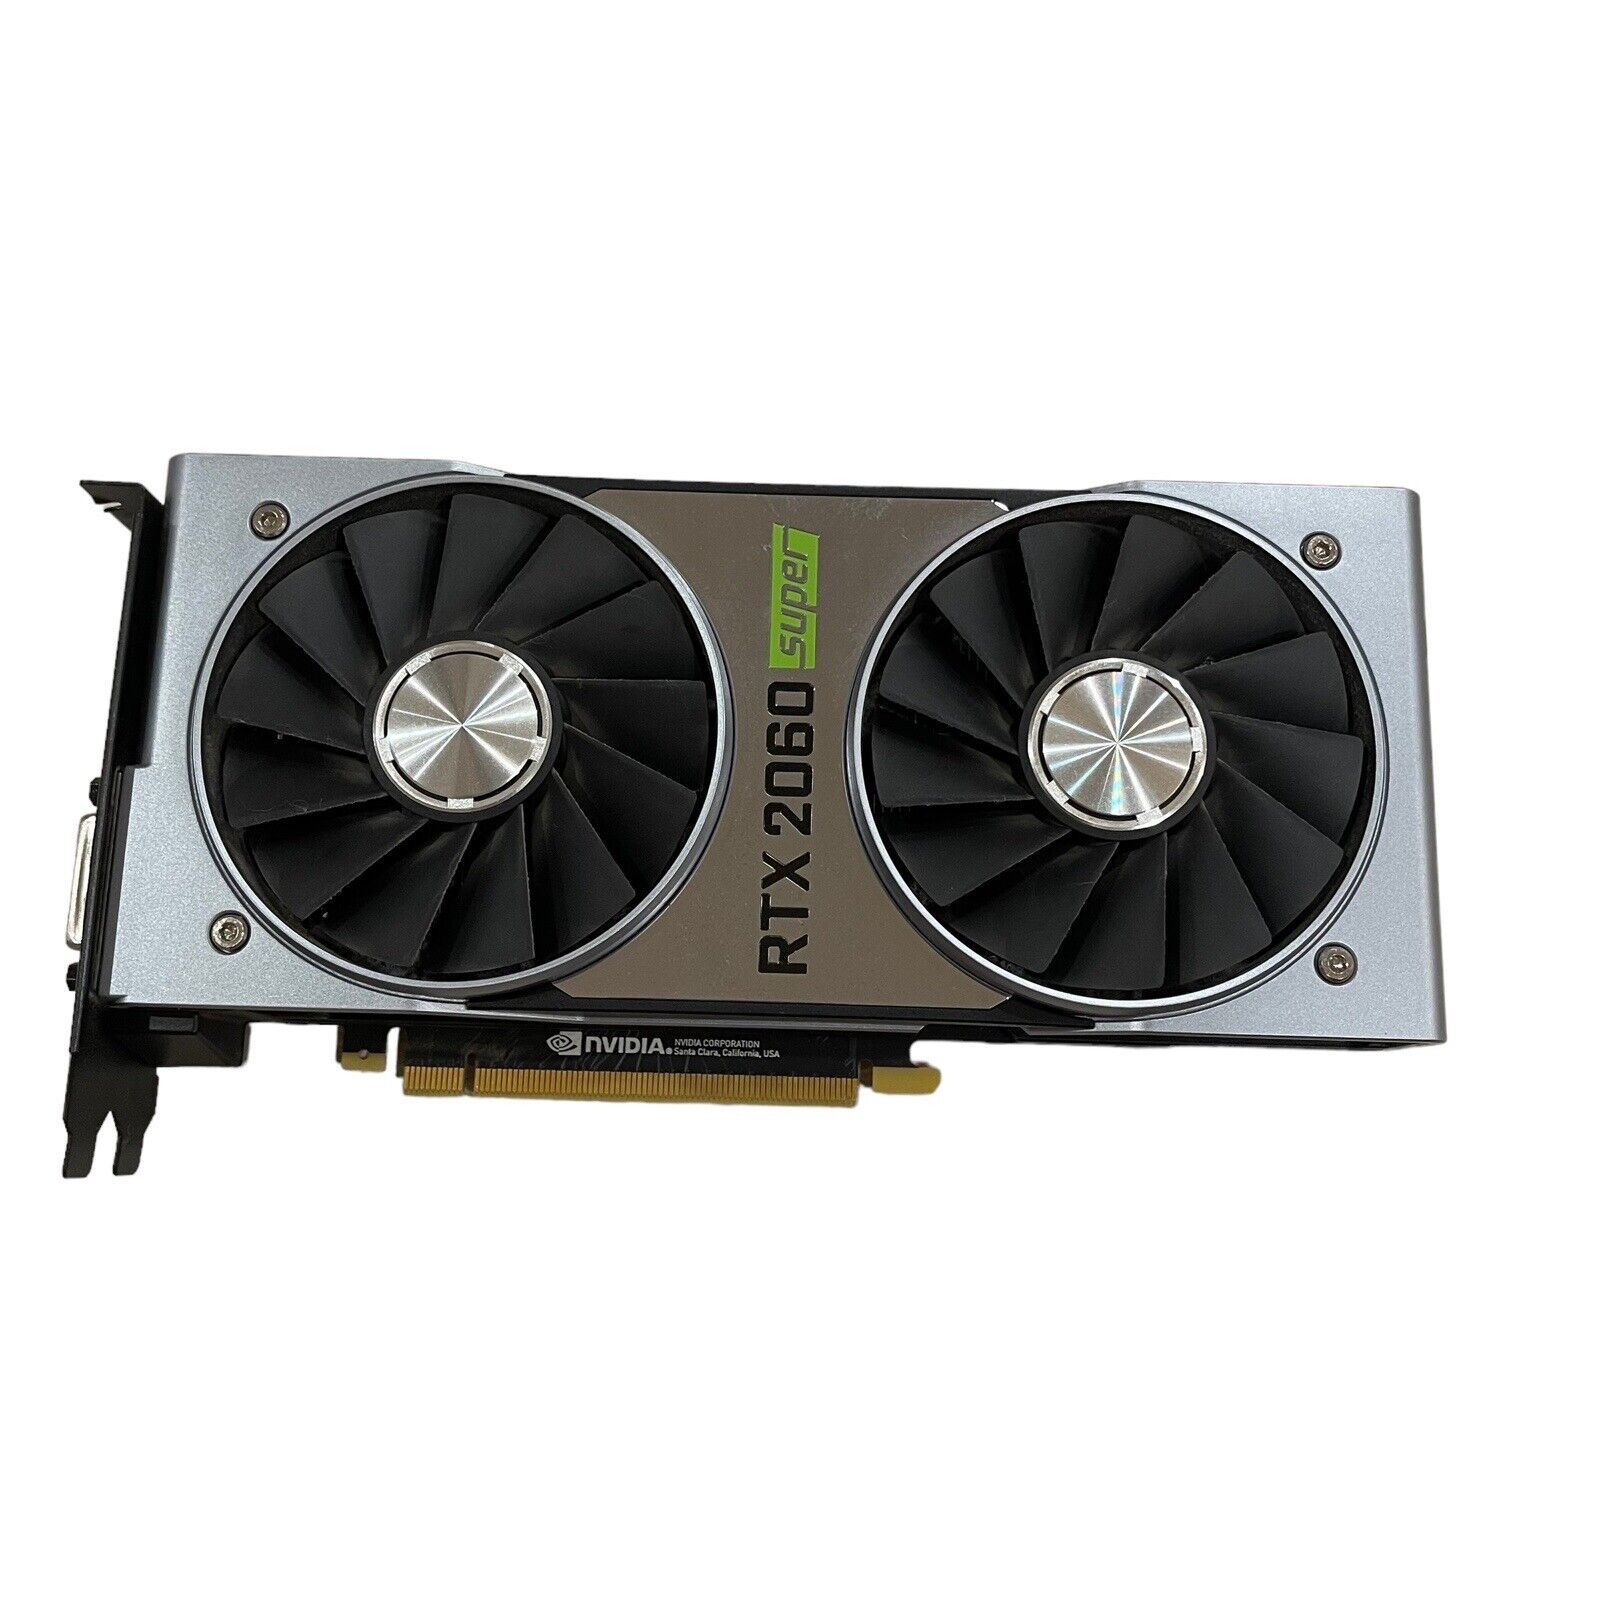 NVIDIA GeForce RTX 2060 Super Founders Edition 8GB GDDR6 Graphics Card